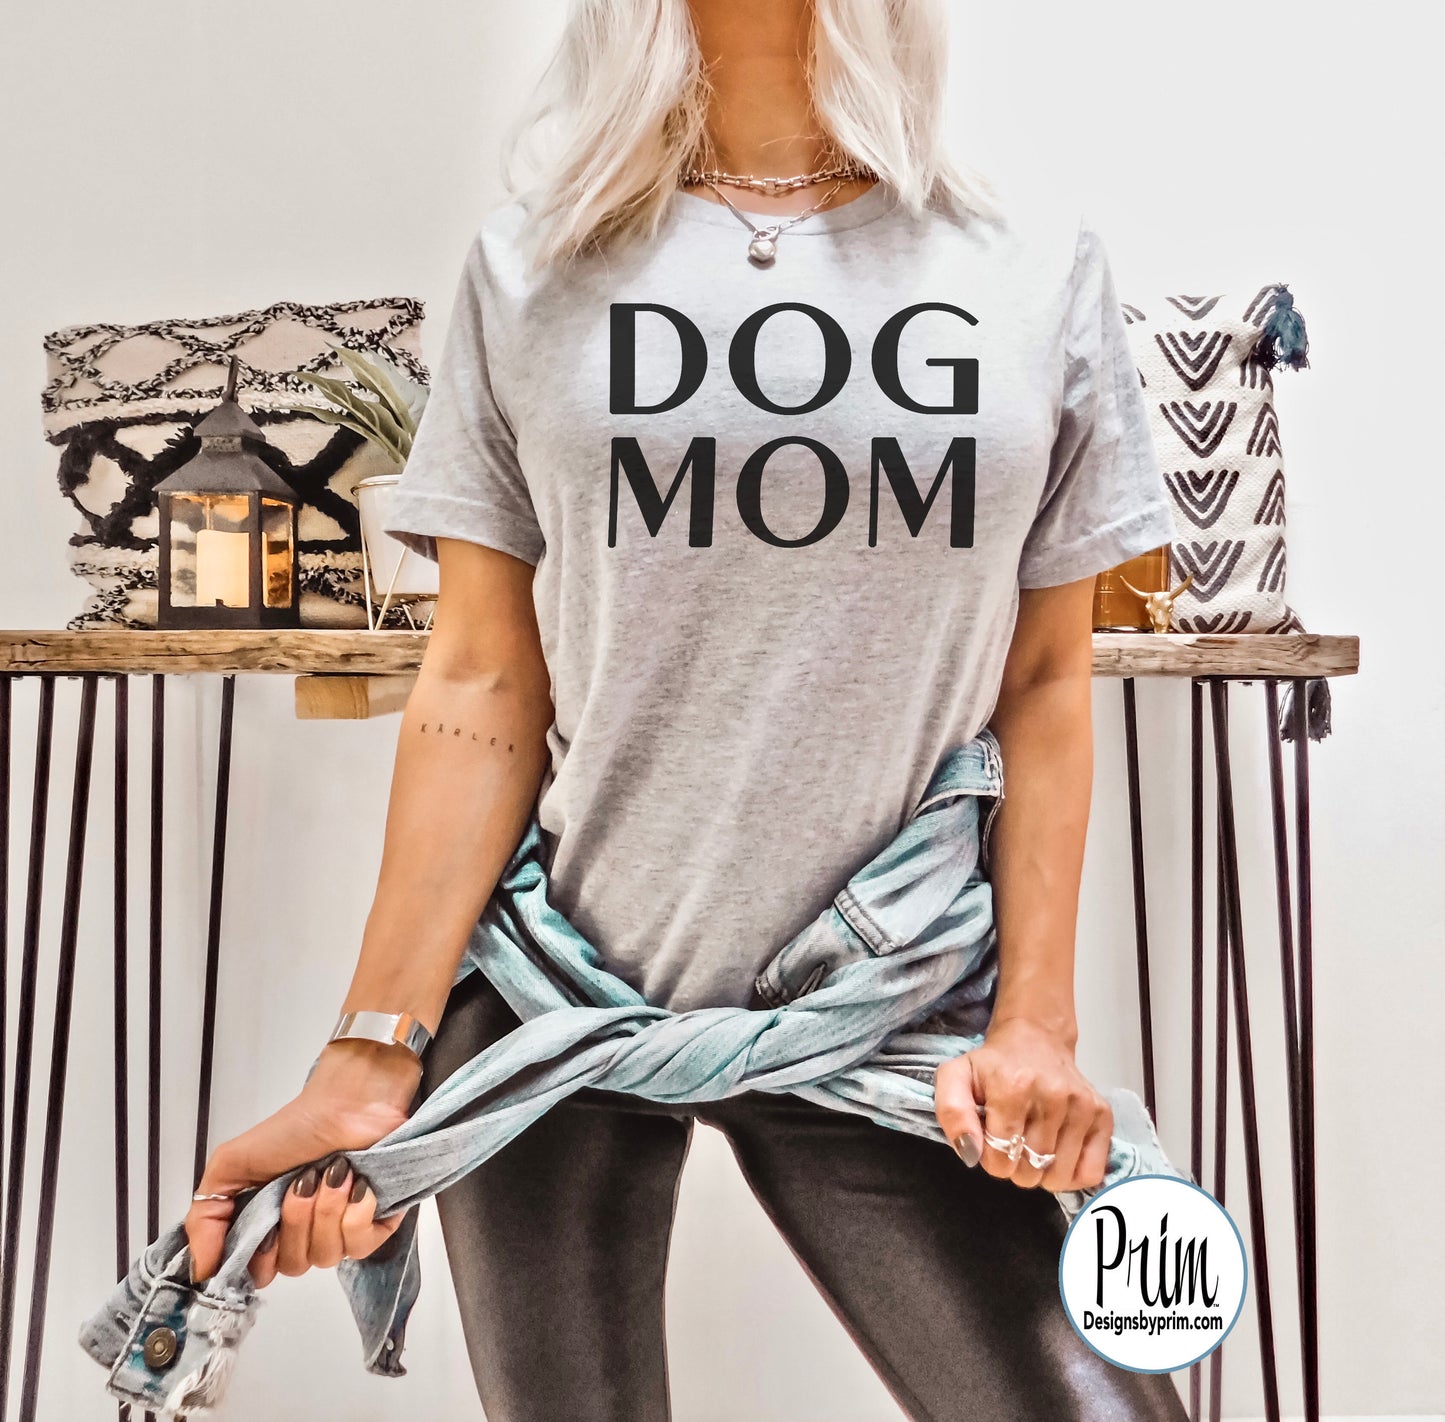 Designs by Prim Dog Mom Animal Lover Soft Unisex T-Shirt | Puppy Pet Dogs Paw Fur Mama Graphic Tee